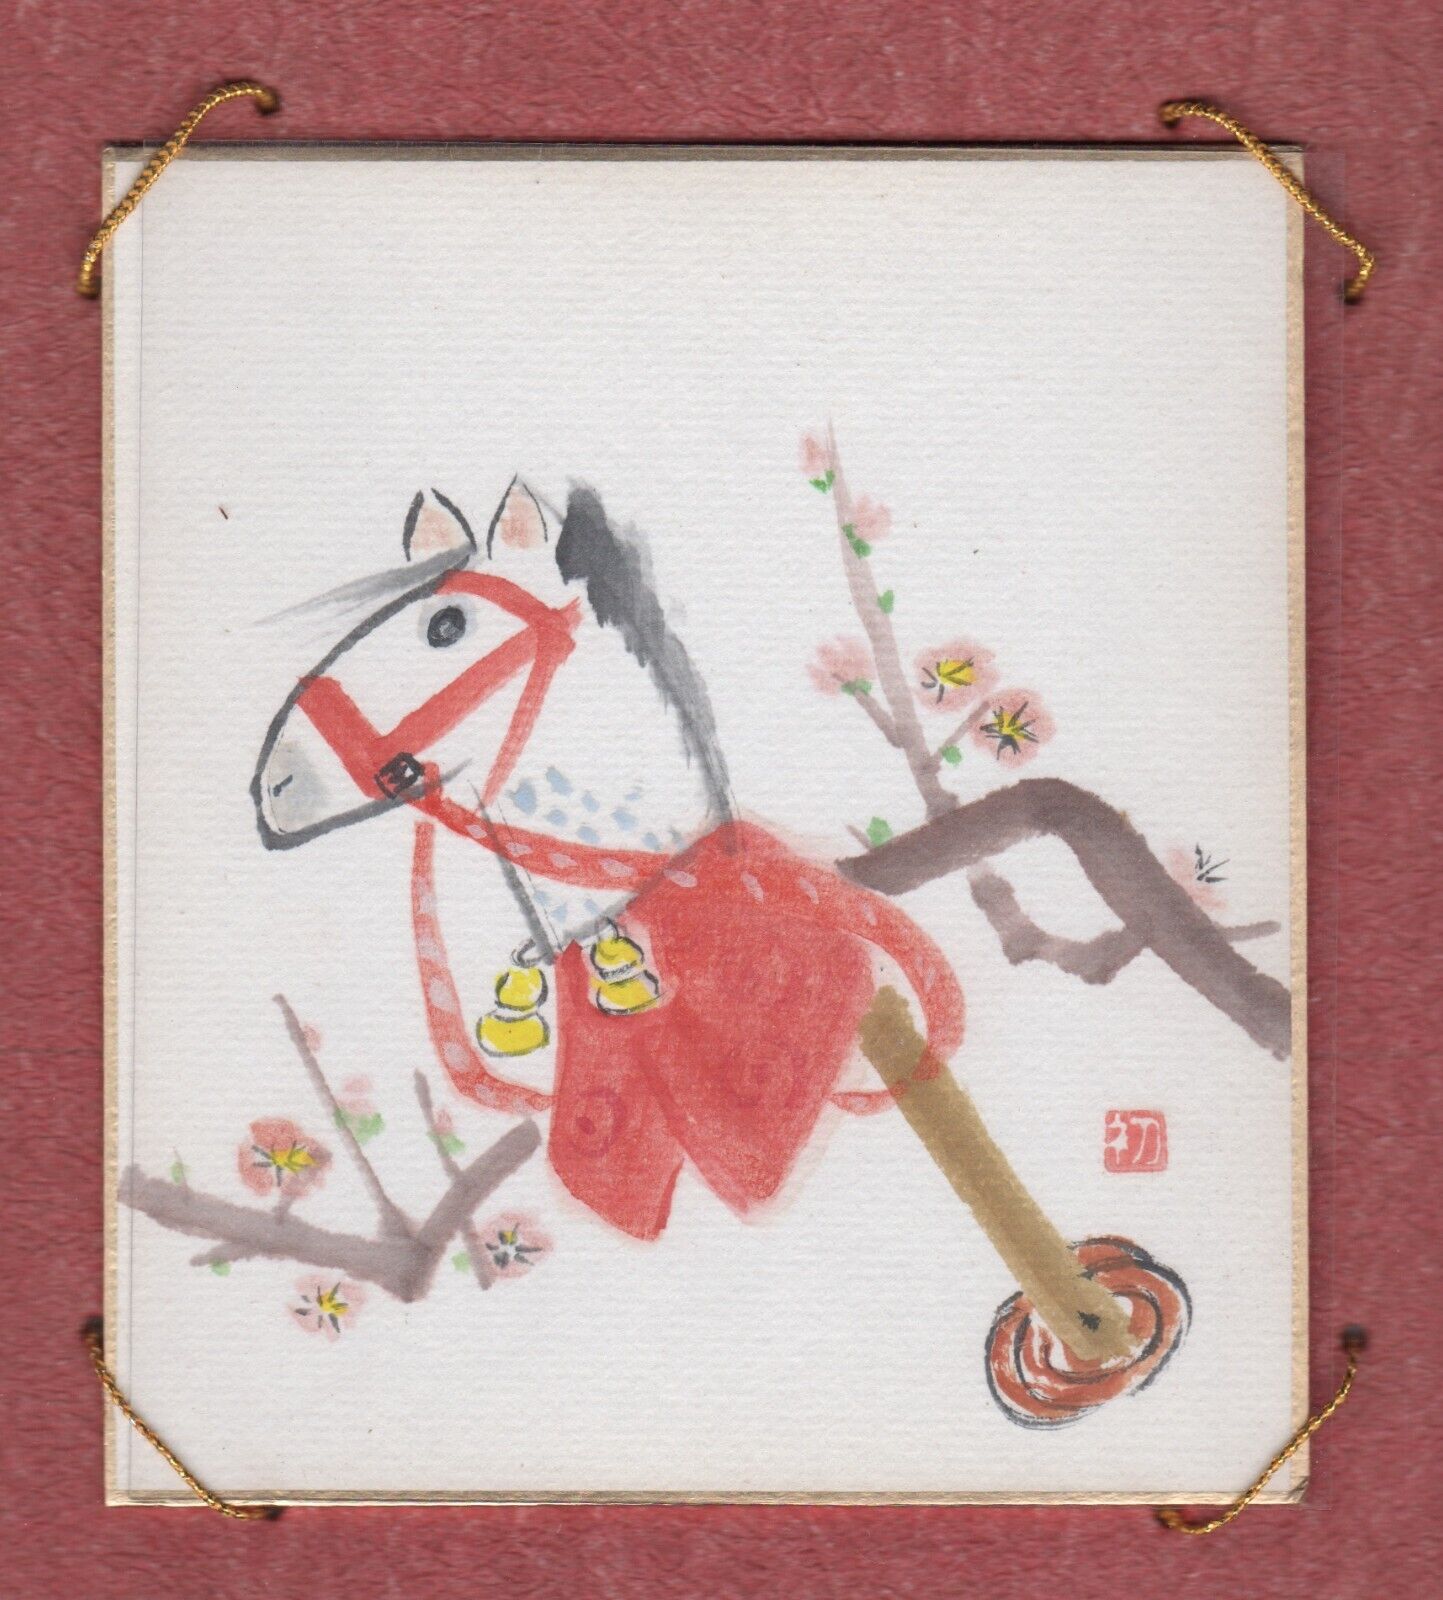 Child's Toy Hobby Horse Vintage 1960s Signed Chinese Art Watercolor Painting